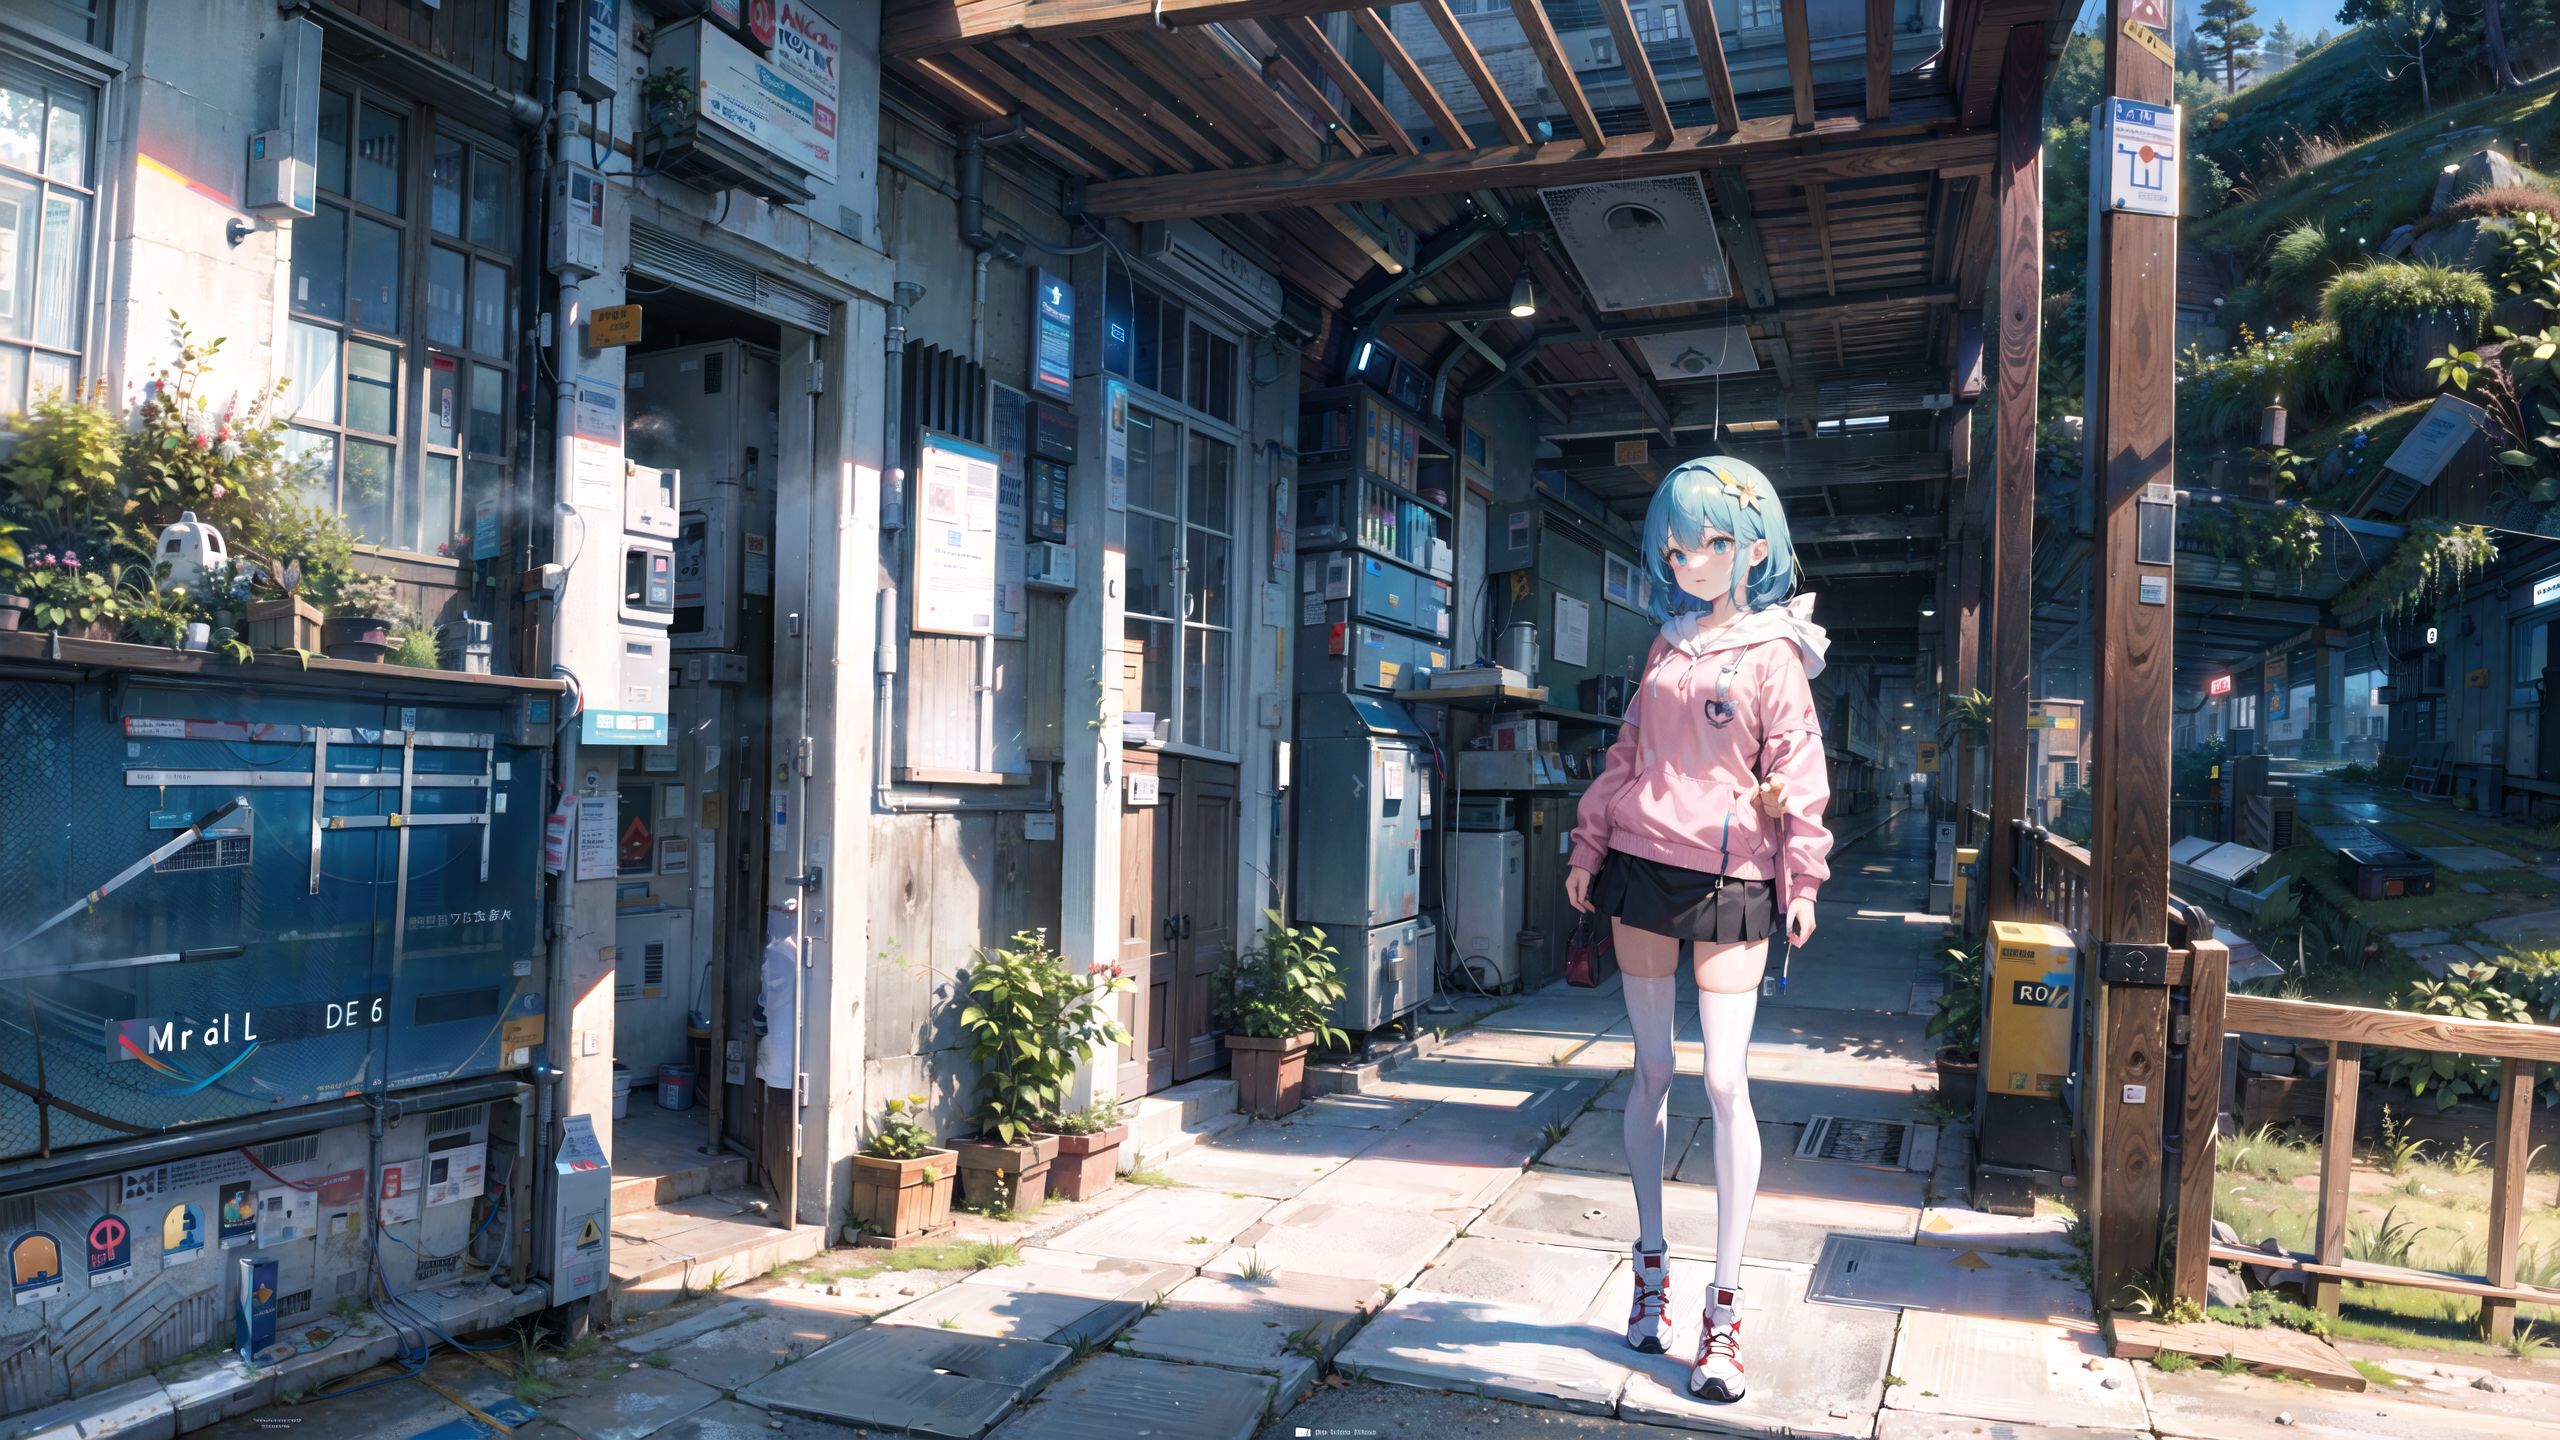 A girl with blue hair wearing a pink jacket and black shorts walking in an alley.